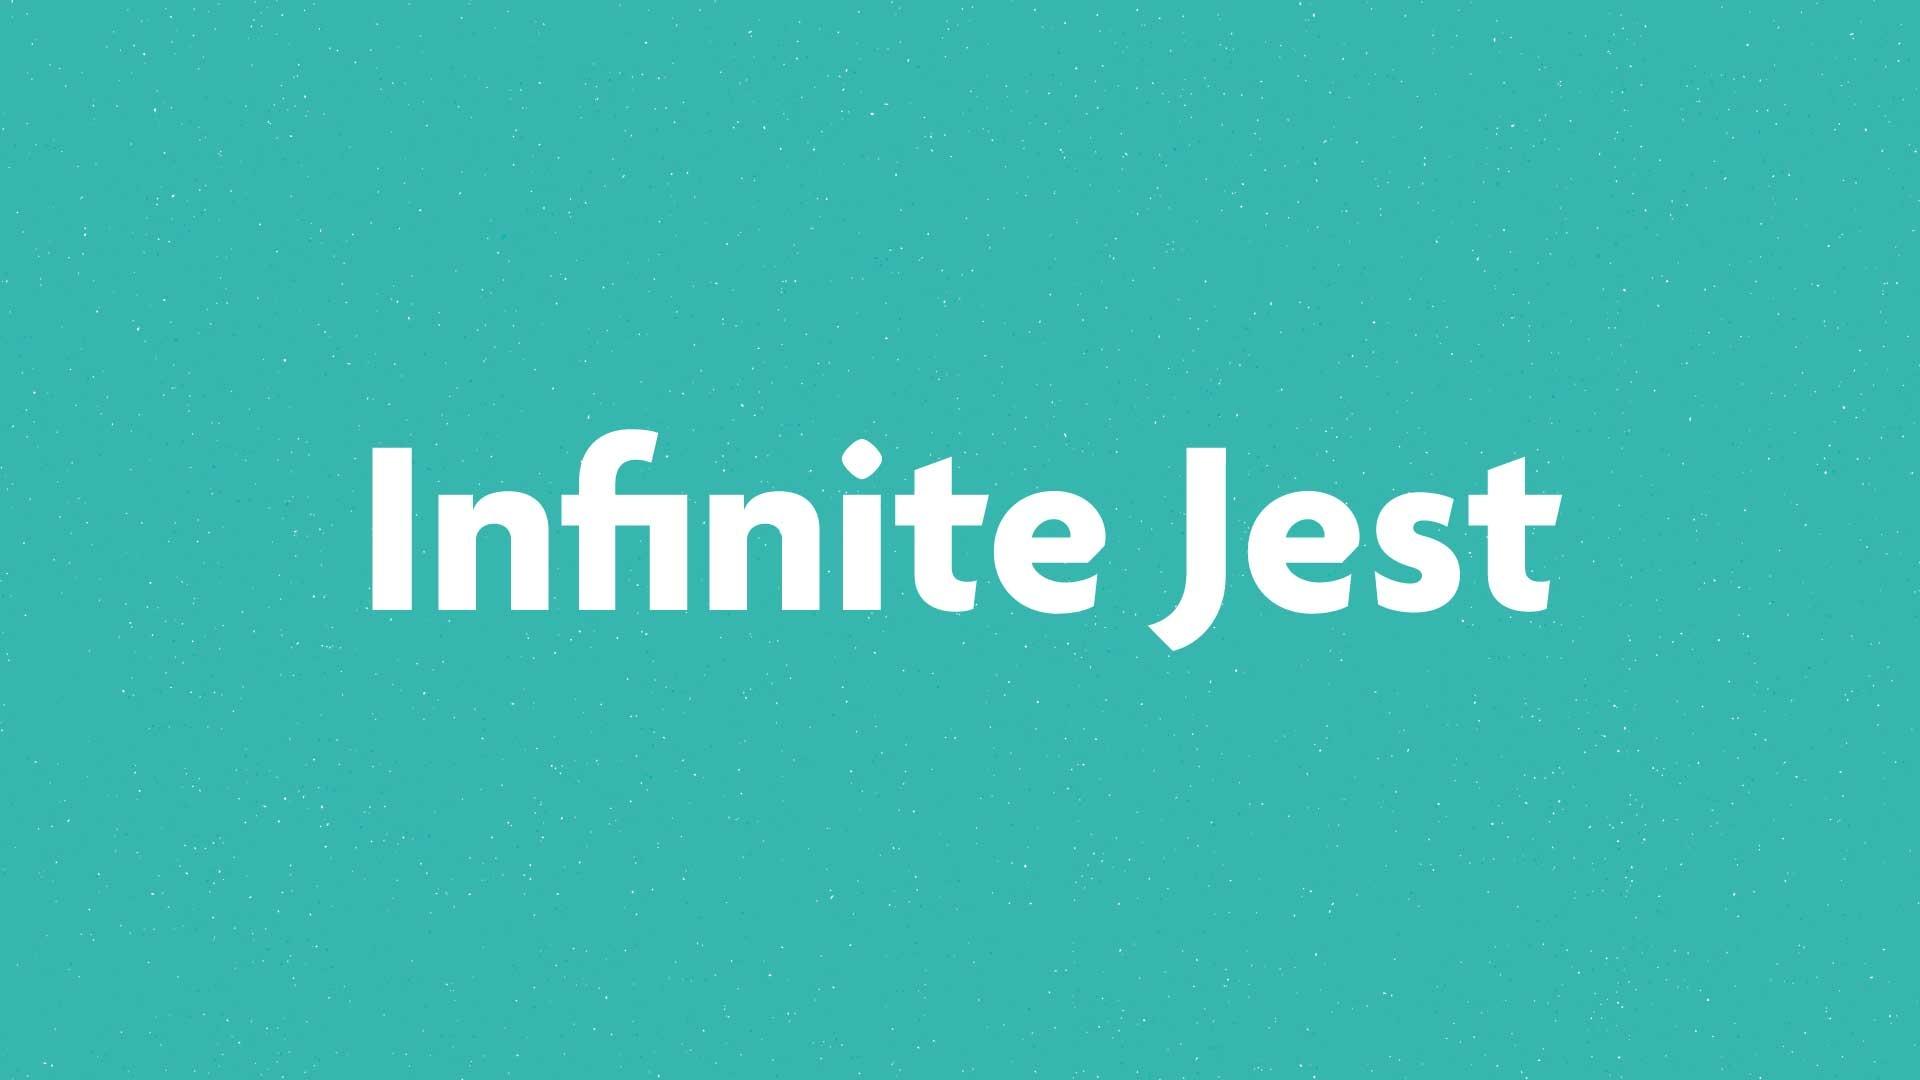 Infinite Jest book submission card on a green background.